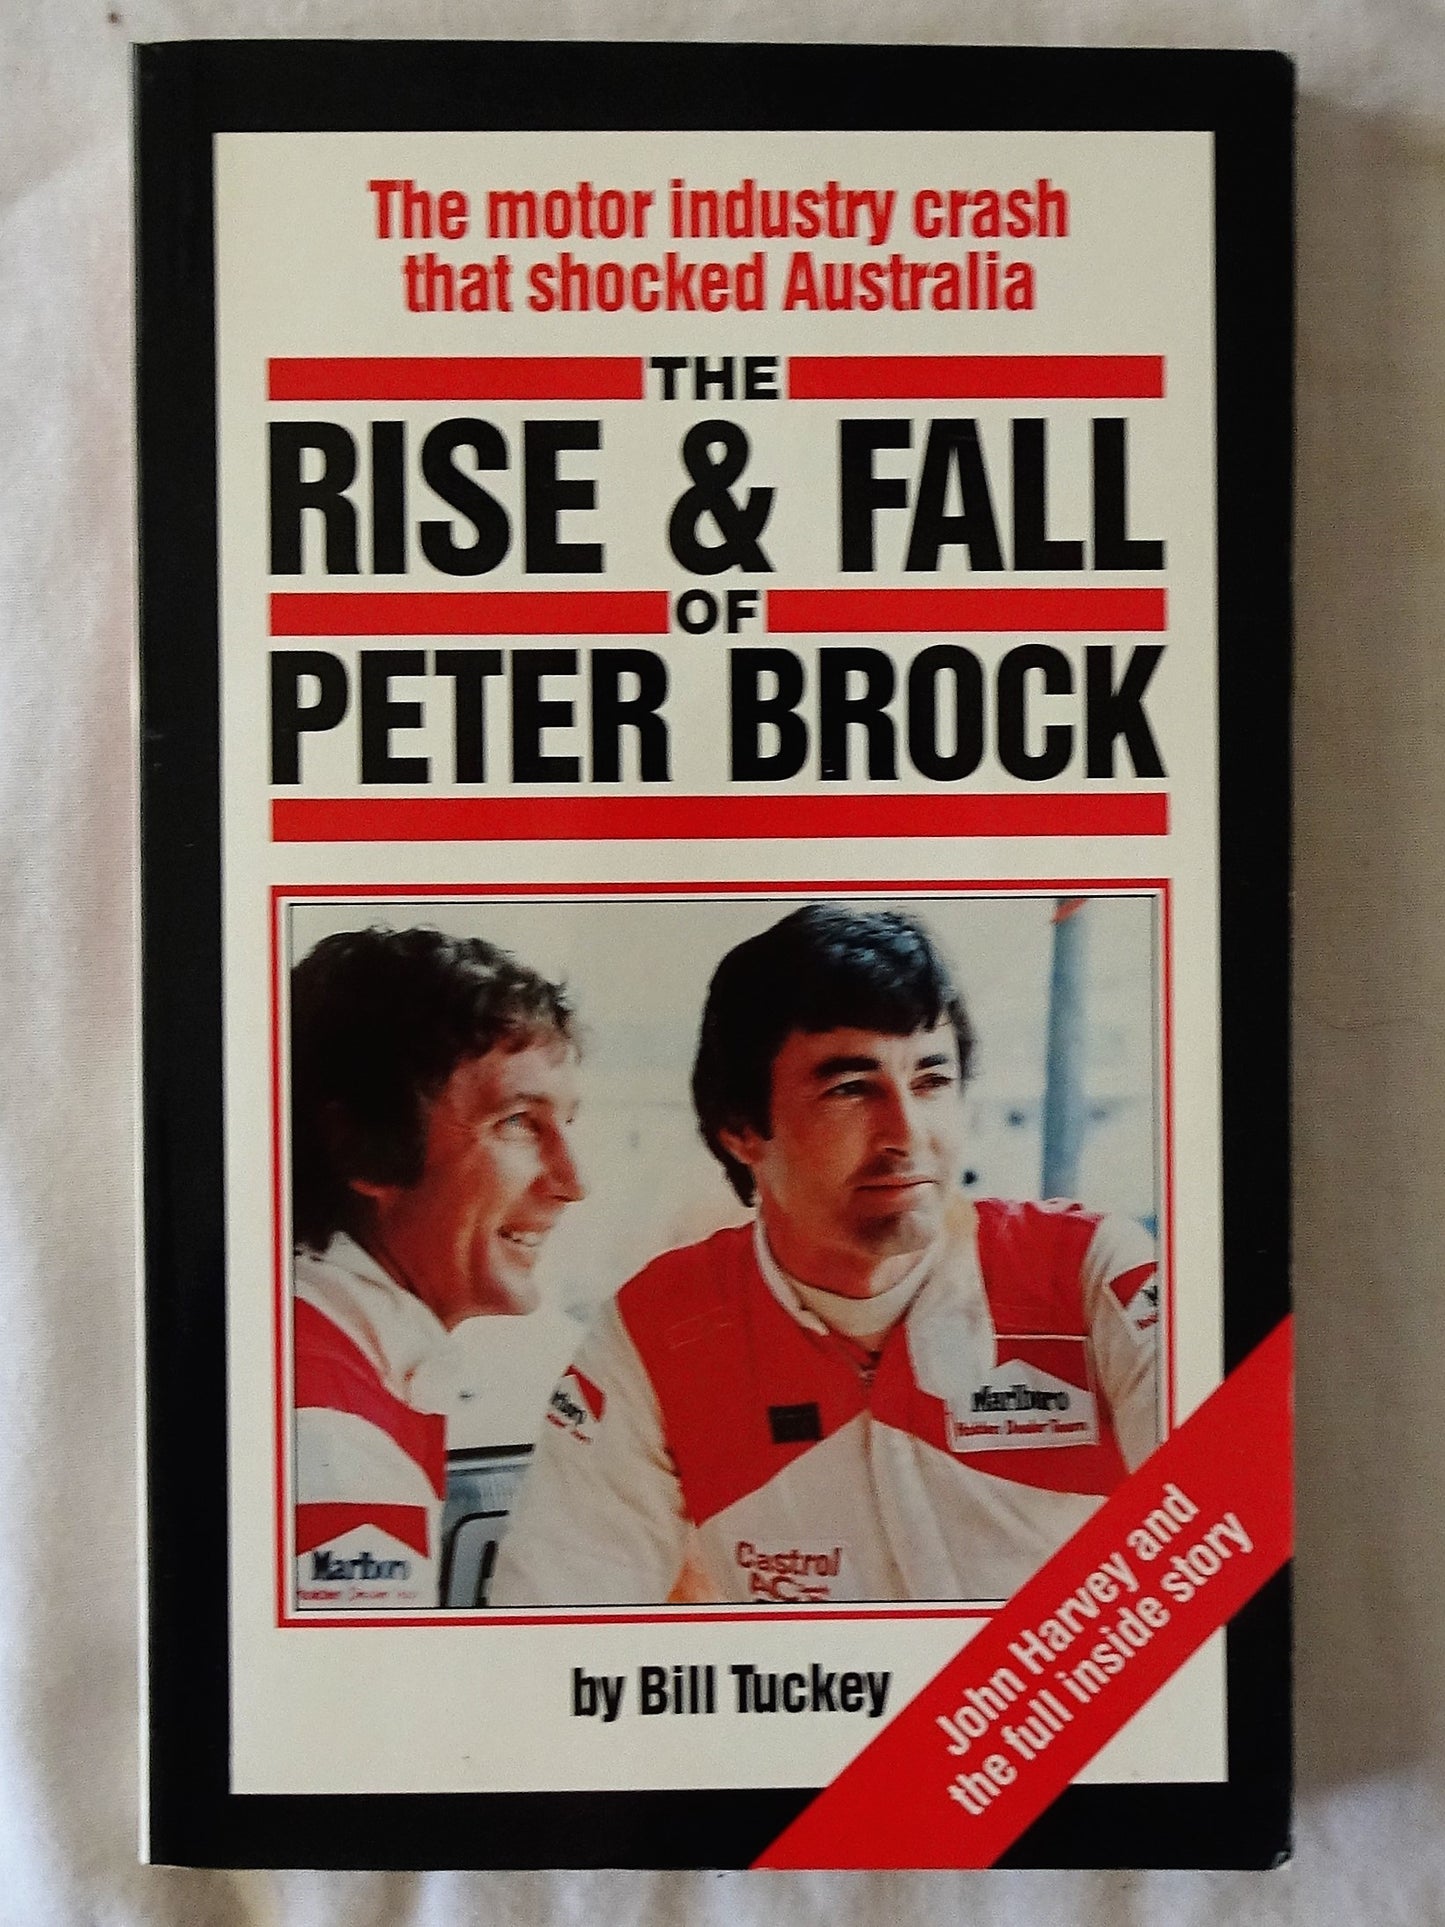 The Rise & Fall of Peter Brock by Bill Tuckey